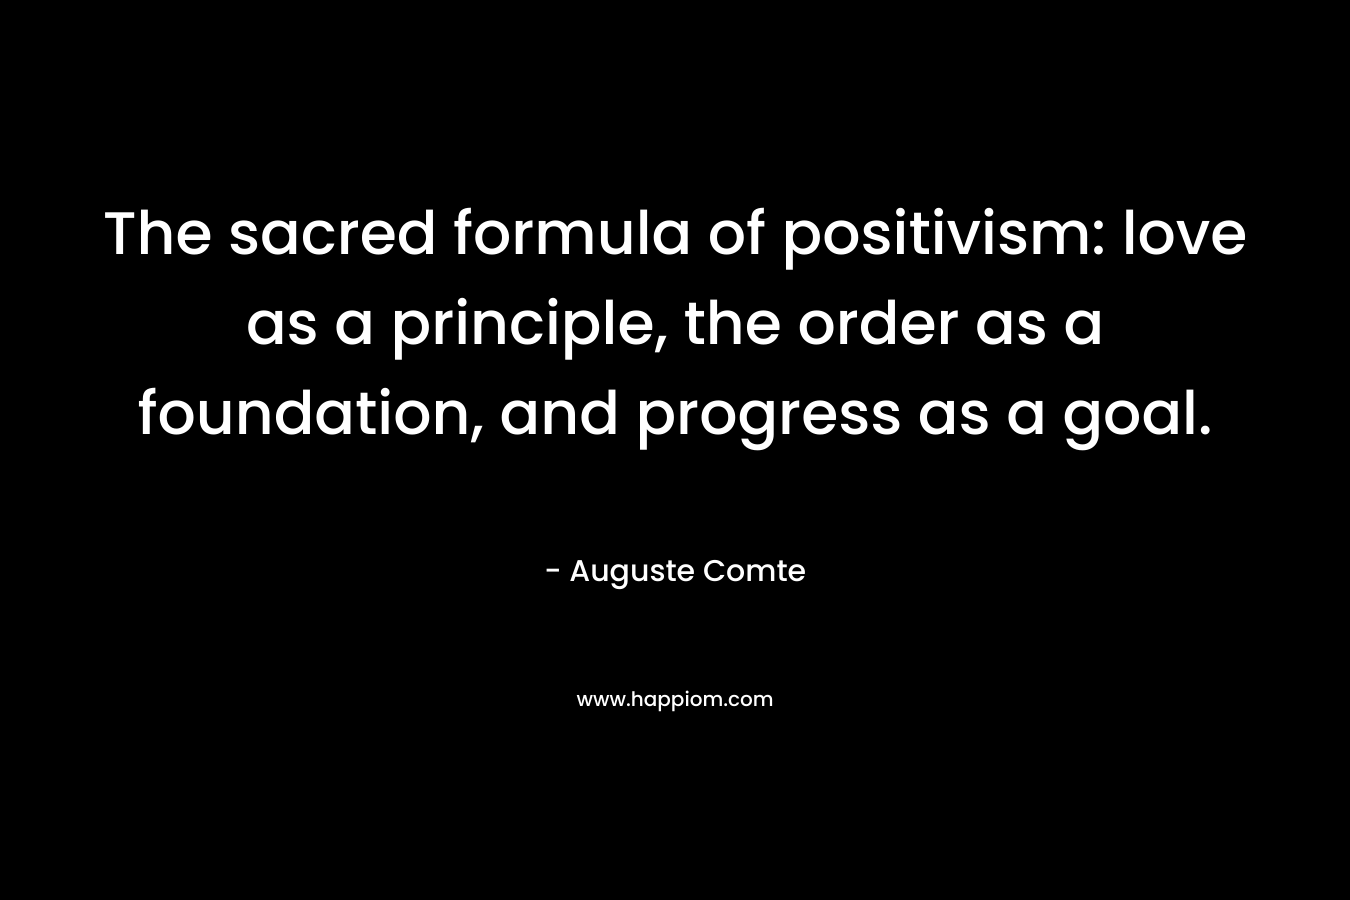 The sacred formula of positivism: love as a principle, the order as a foundation, and progress as a goal. – Auguste Comte